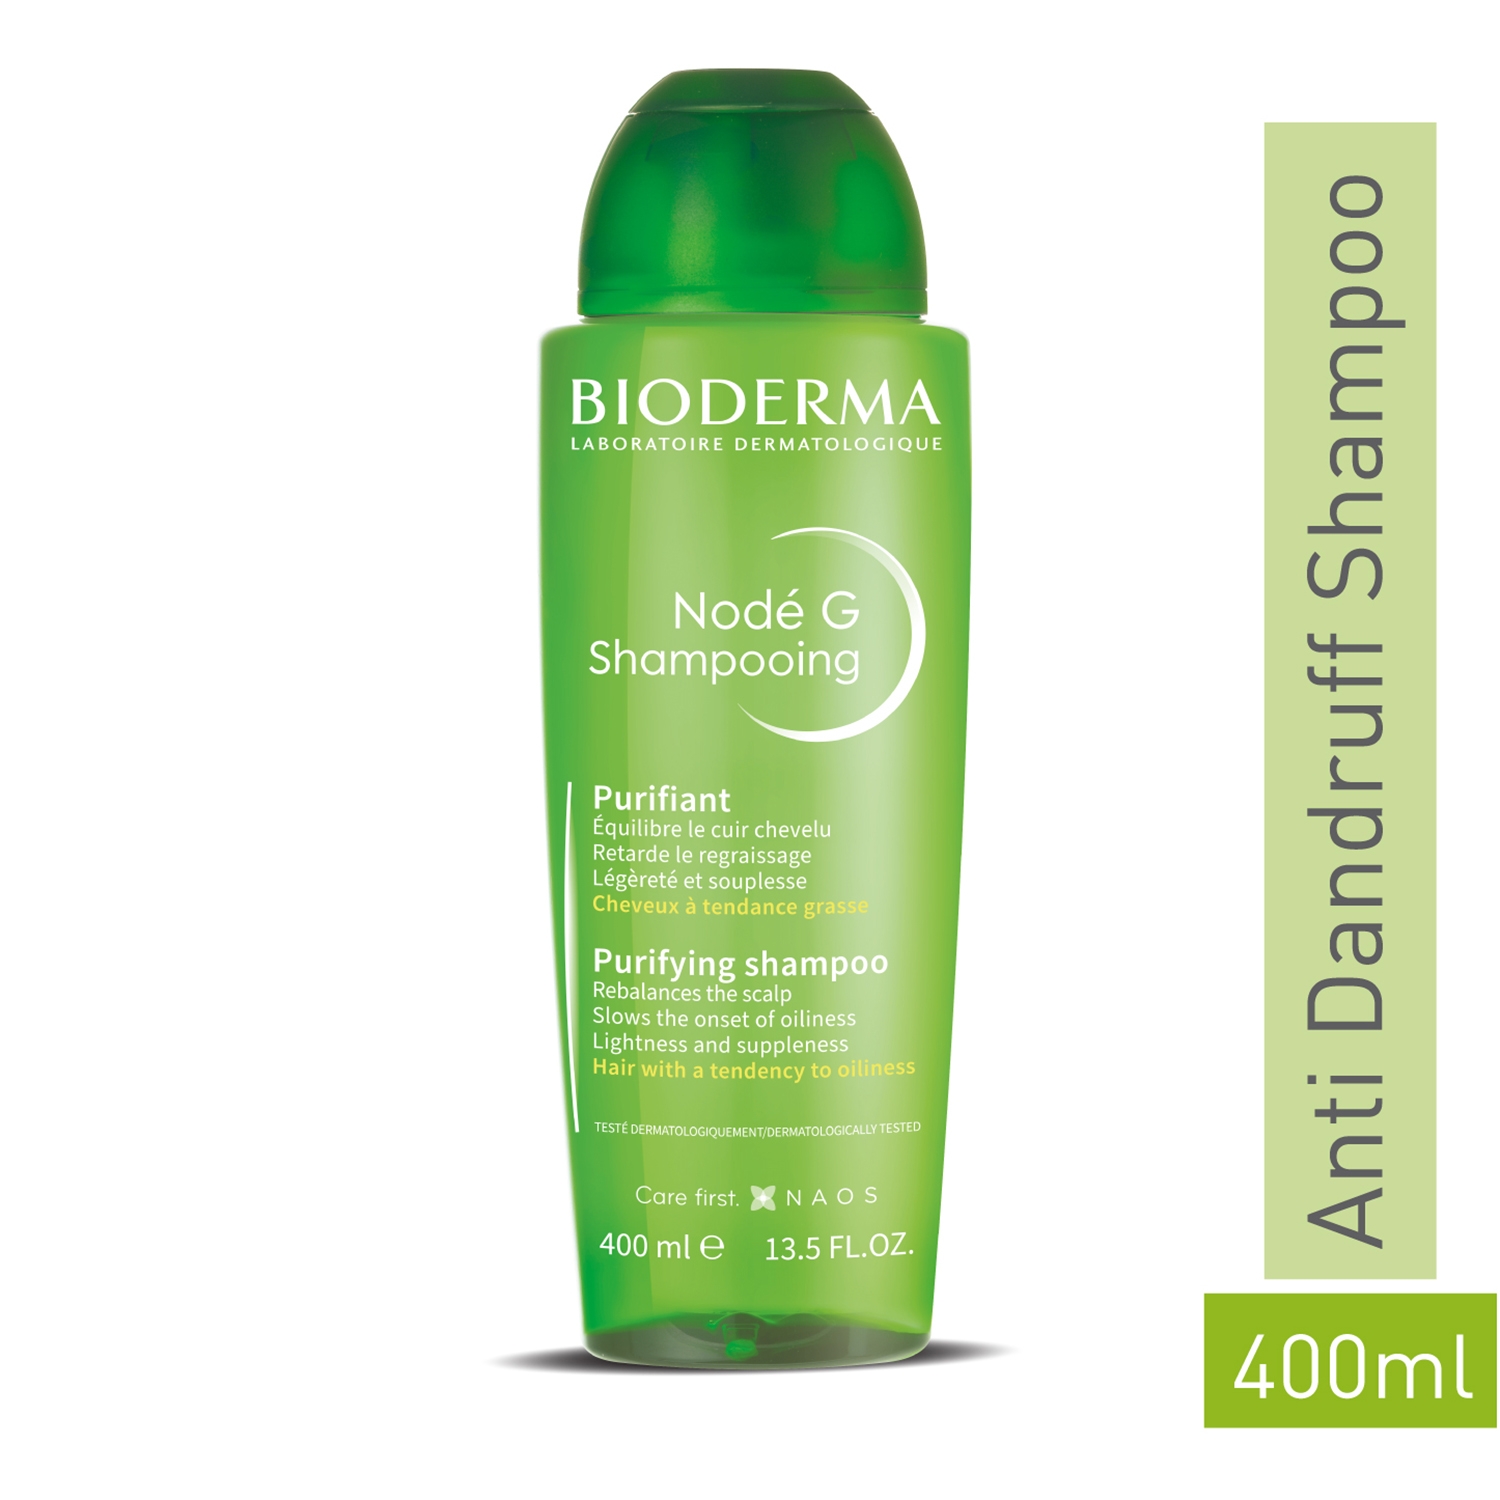 Bioderma | Bioderma Node G Purifying Shampoo For Hair With Tendency To Oiliness (400ml)